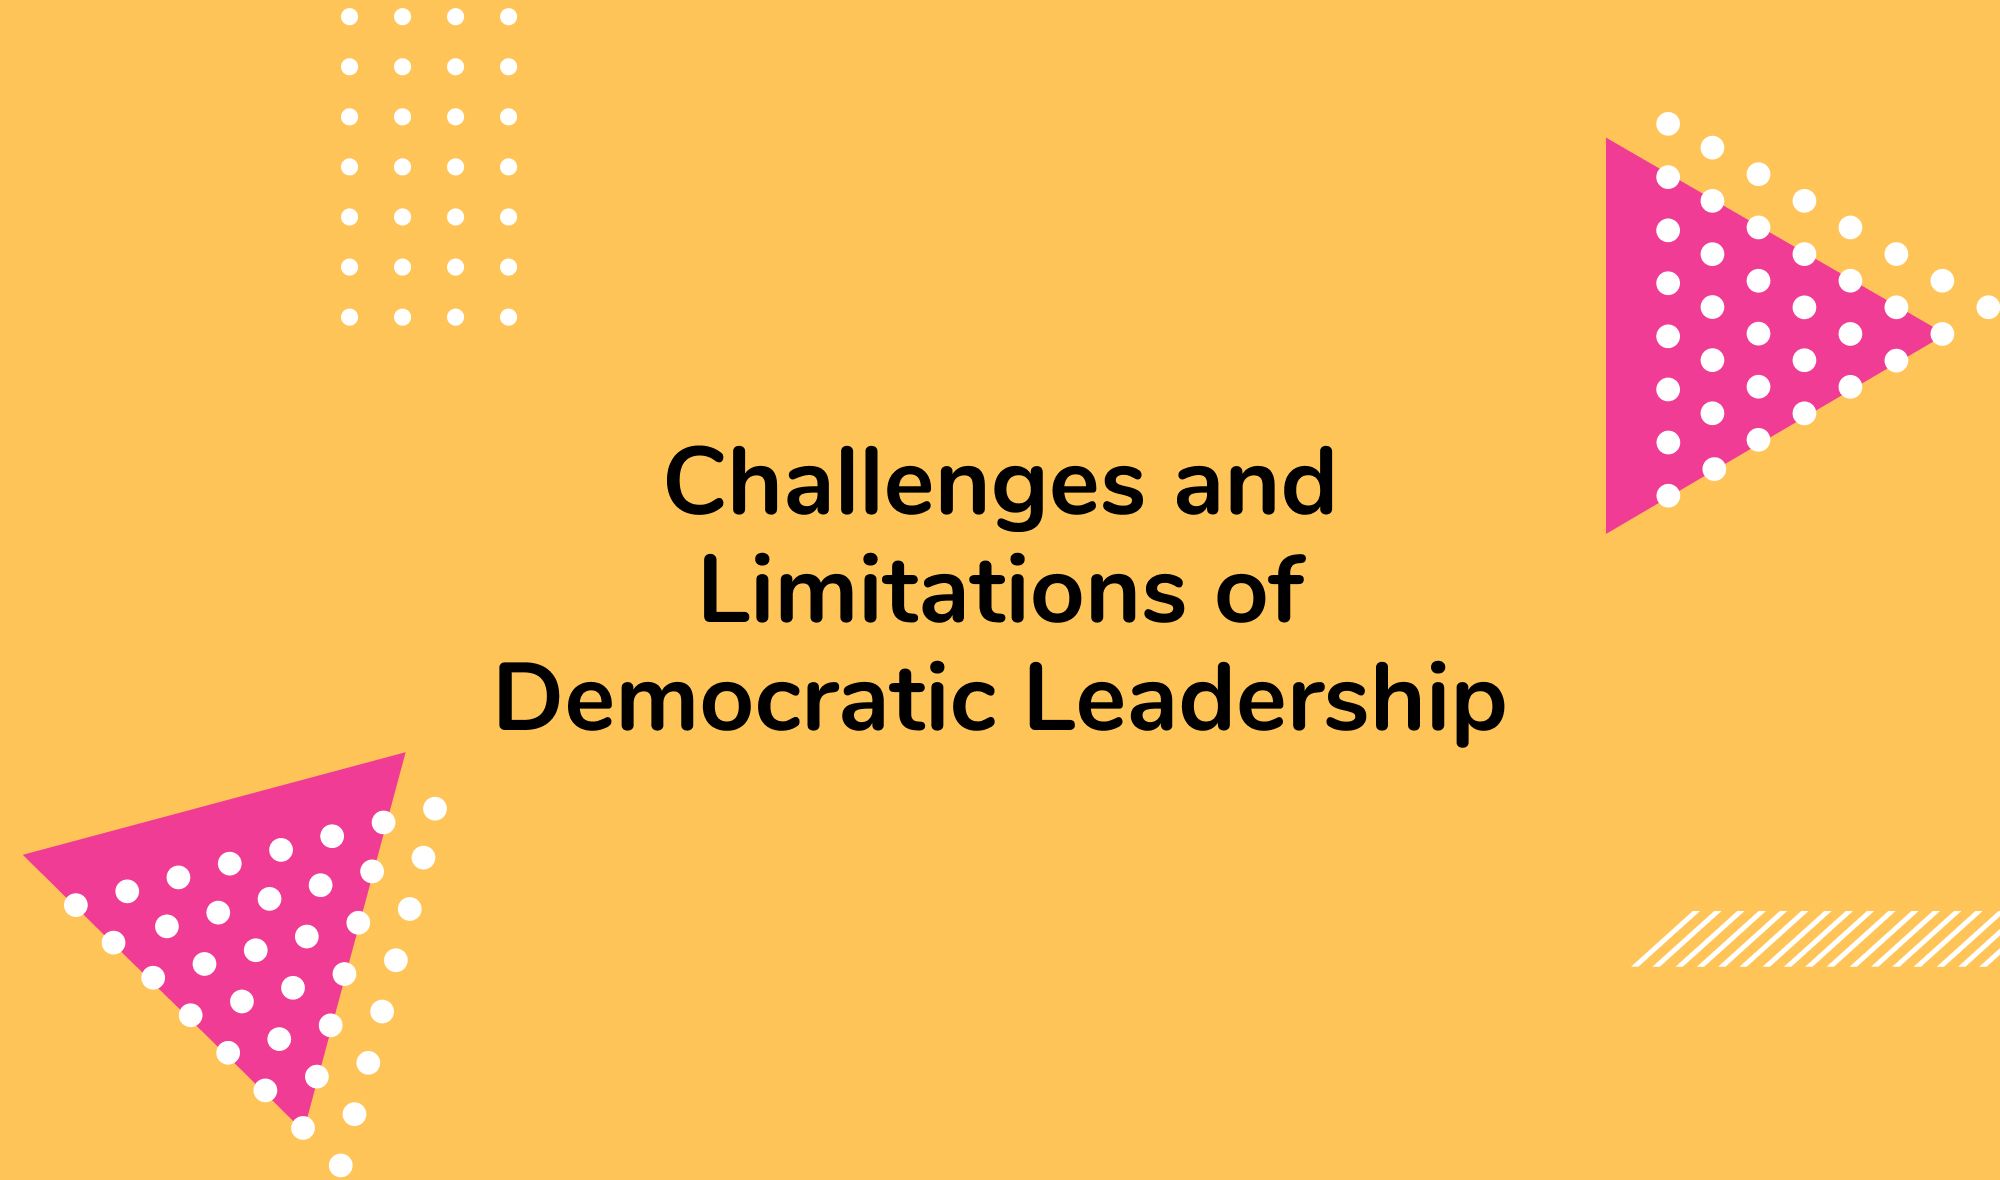 Challenges and Limitations of Democratic Leadership